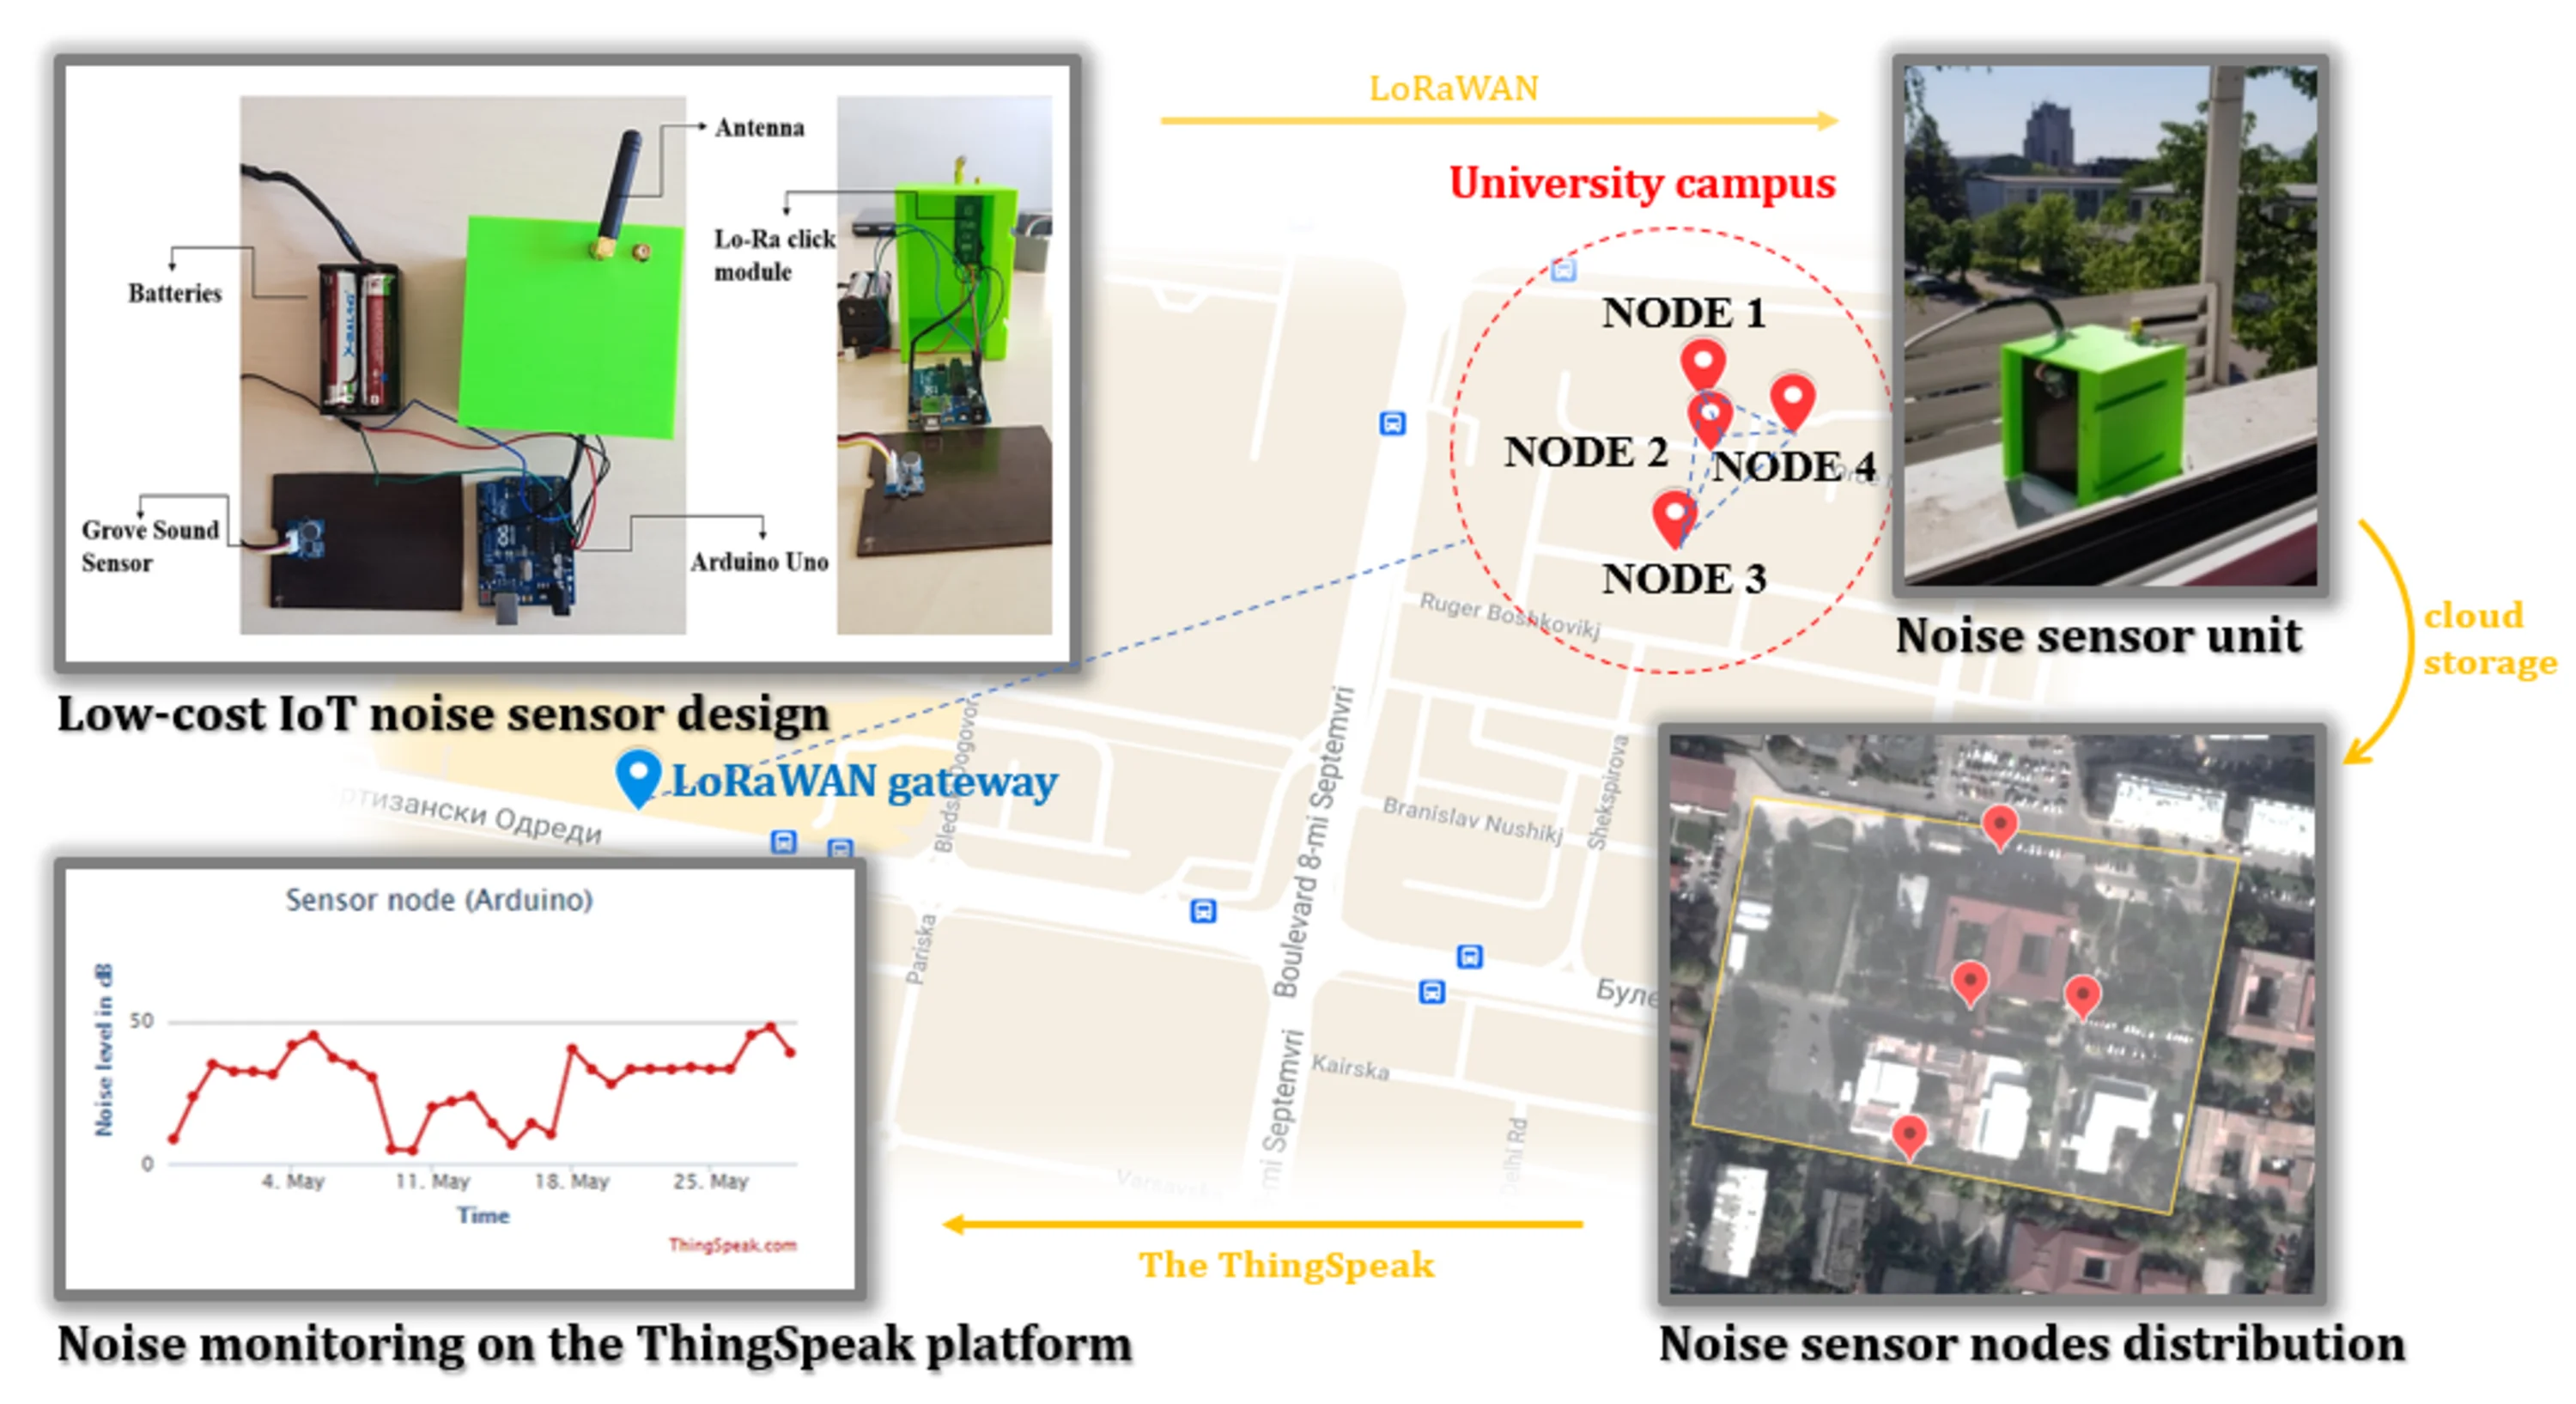 Design of low-cost wireless noise monitoring sensor unit based on IoT concept